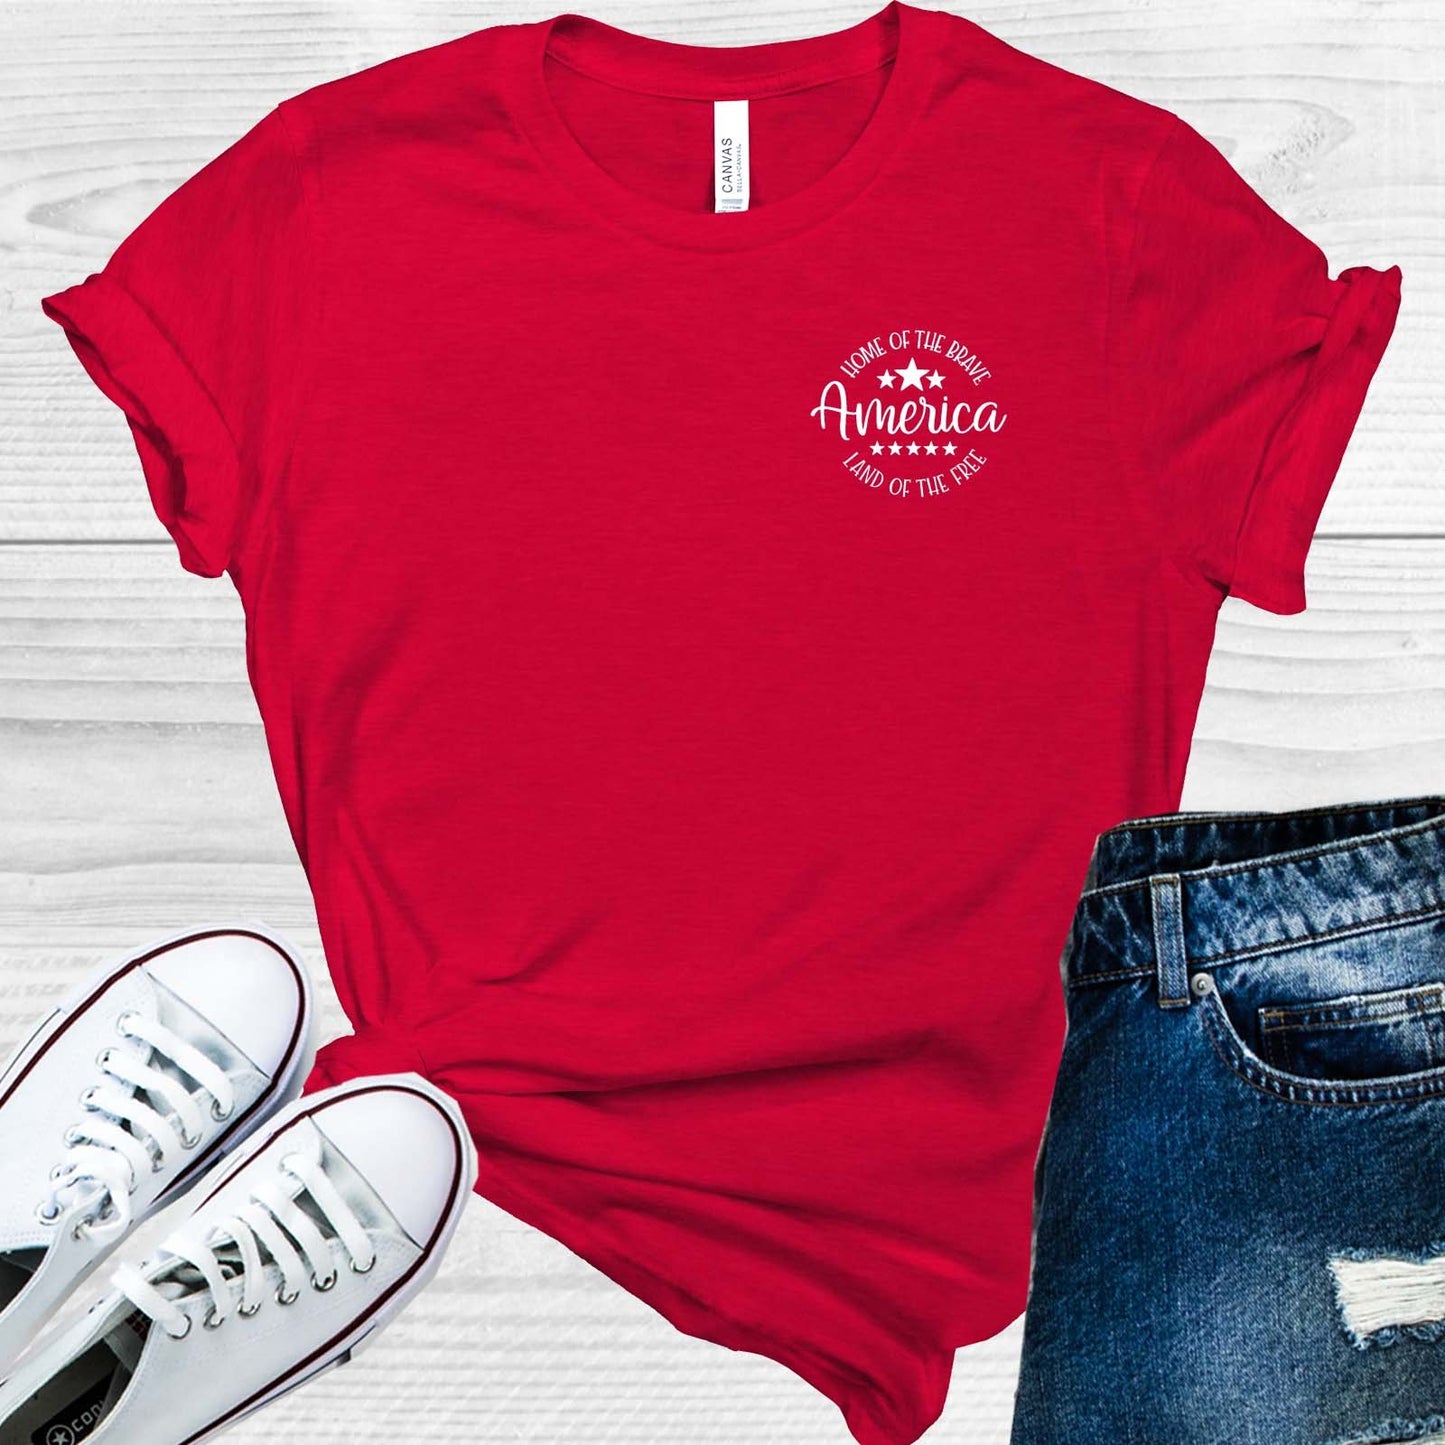 America Land of the Free Home of the Brave Pocket Graphic Tee ...